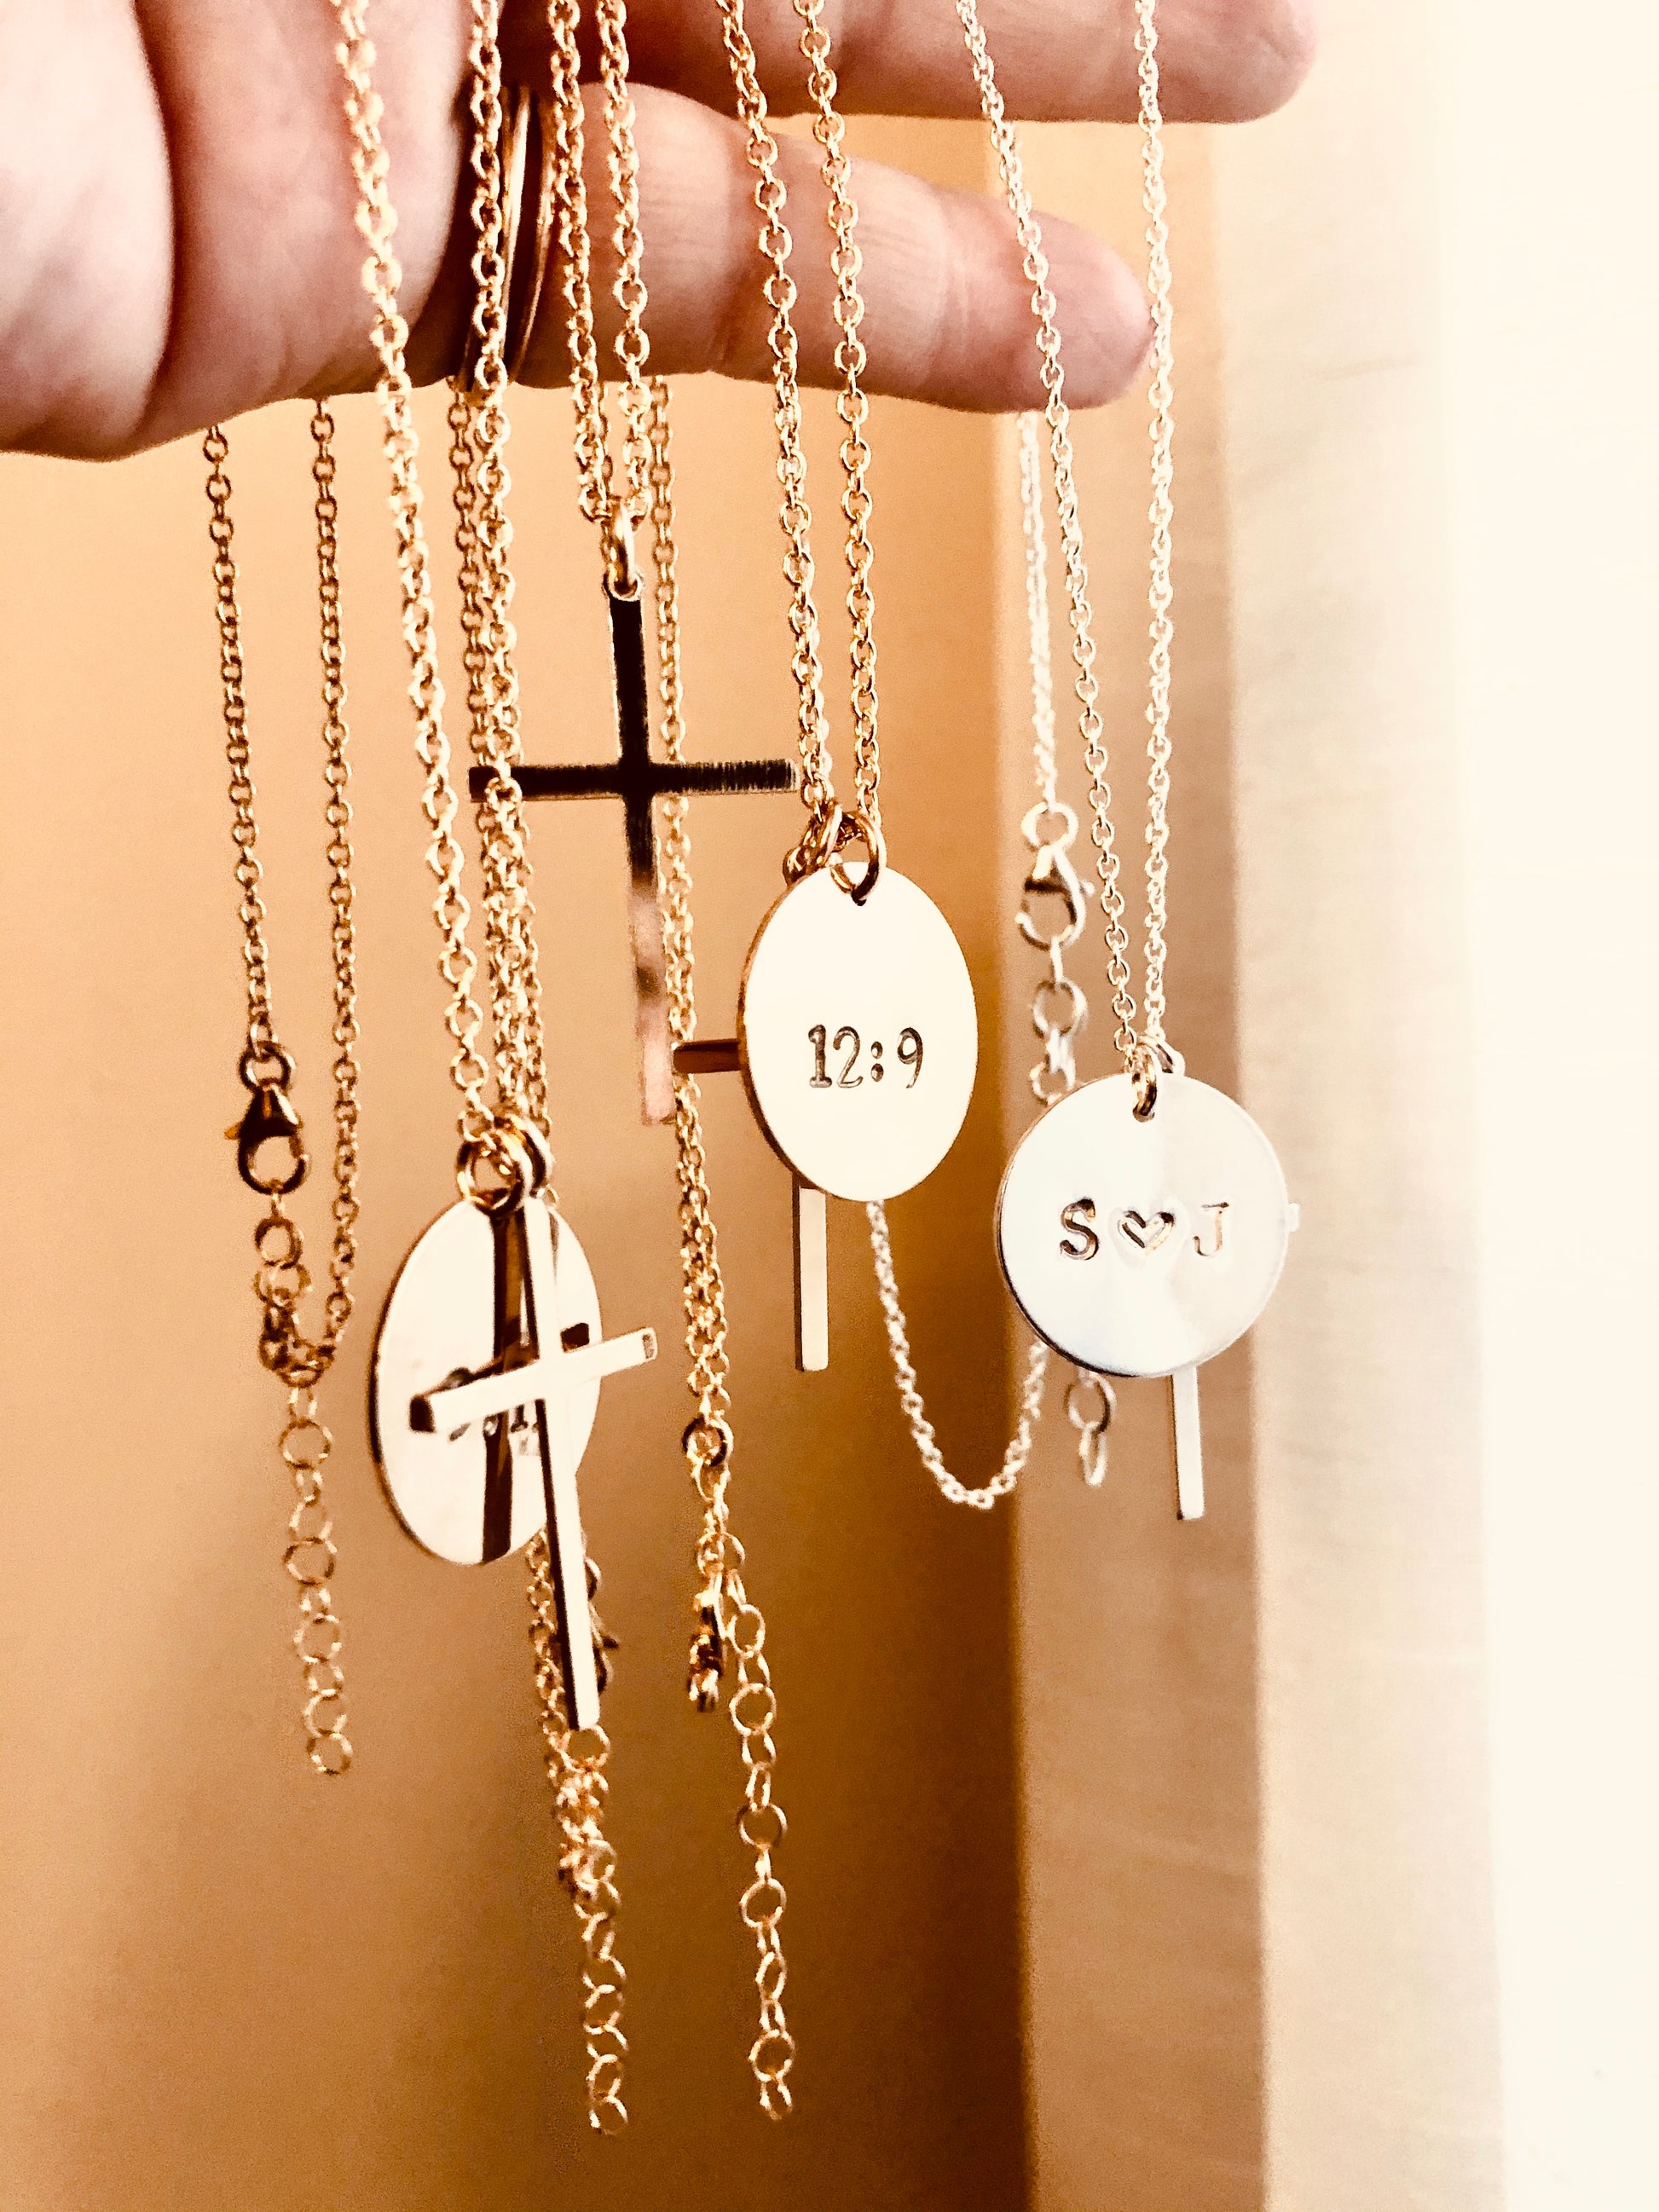 Mothers Gift, Disc and Cross Necklace, Faith Jewelry, Cross initial Necklace, Religious Necklace, Personalized Gift, Gift For Her